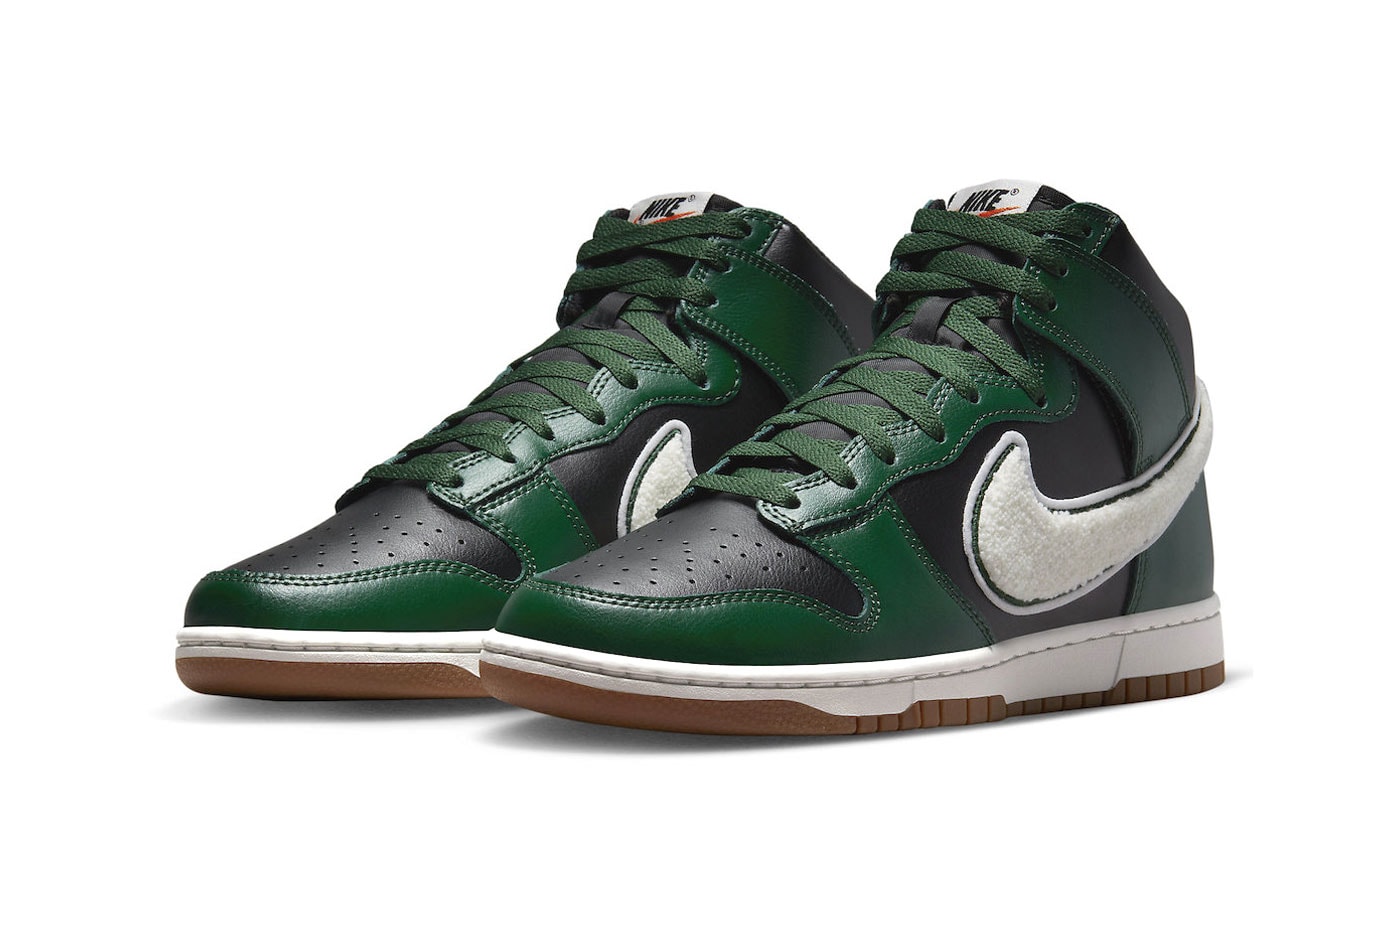 Nike Dunk High Chenille Swoosh Gorge Green DR8805-001 Photos info